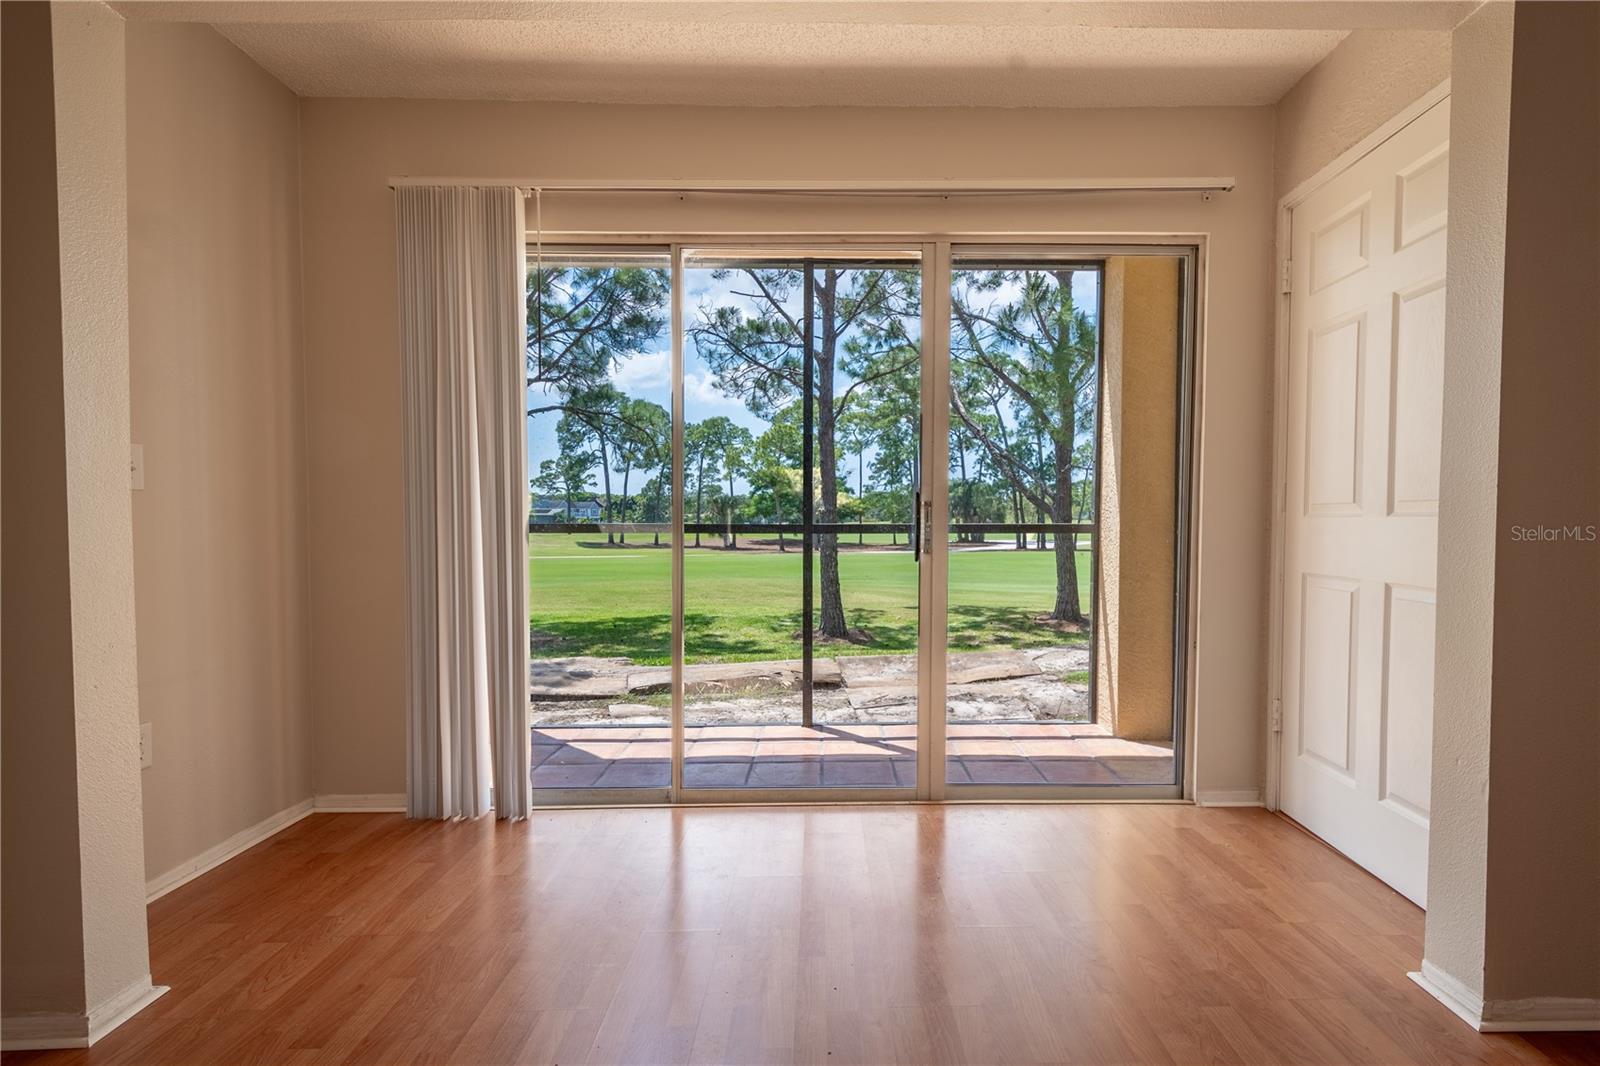 Sliding glass doors in the living room frame a view of the golf course.